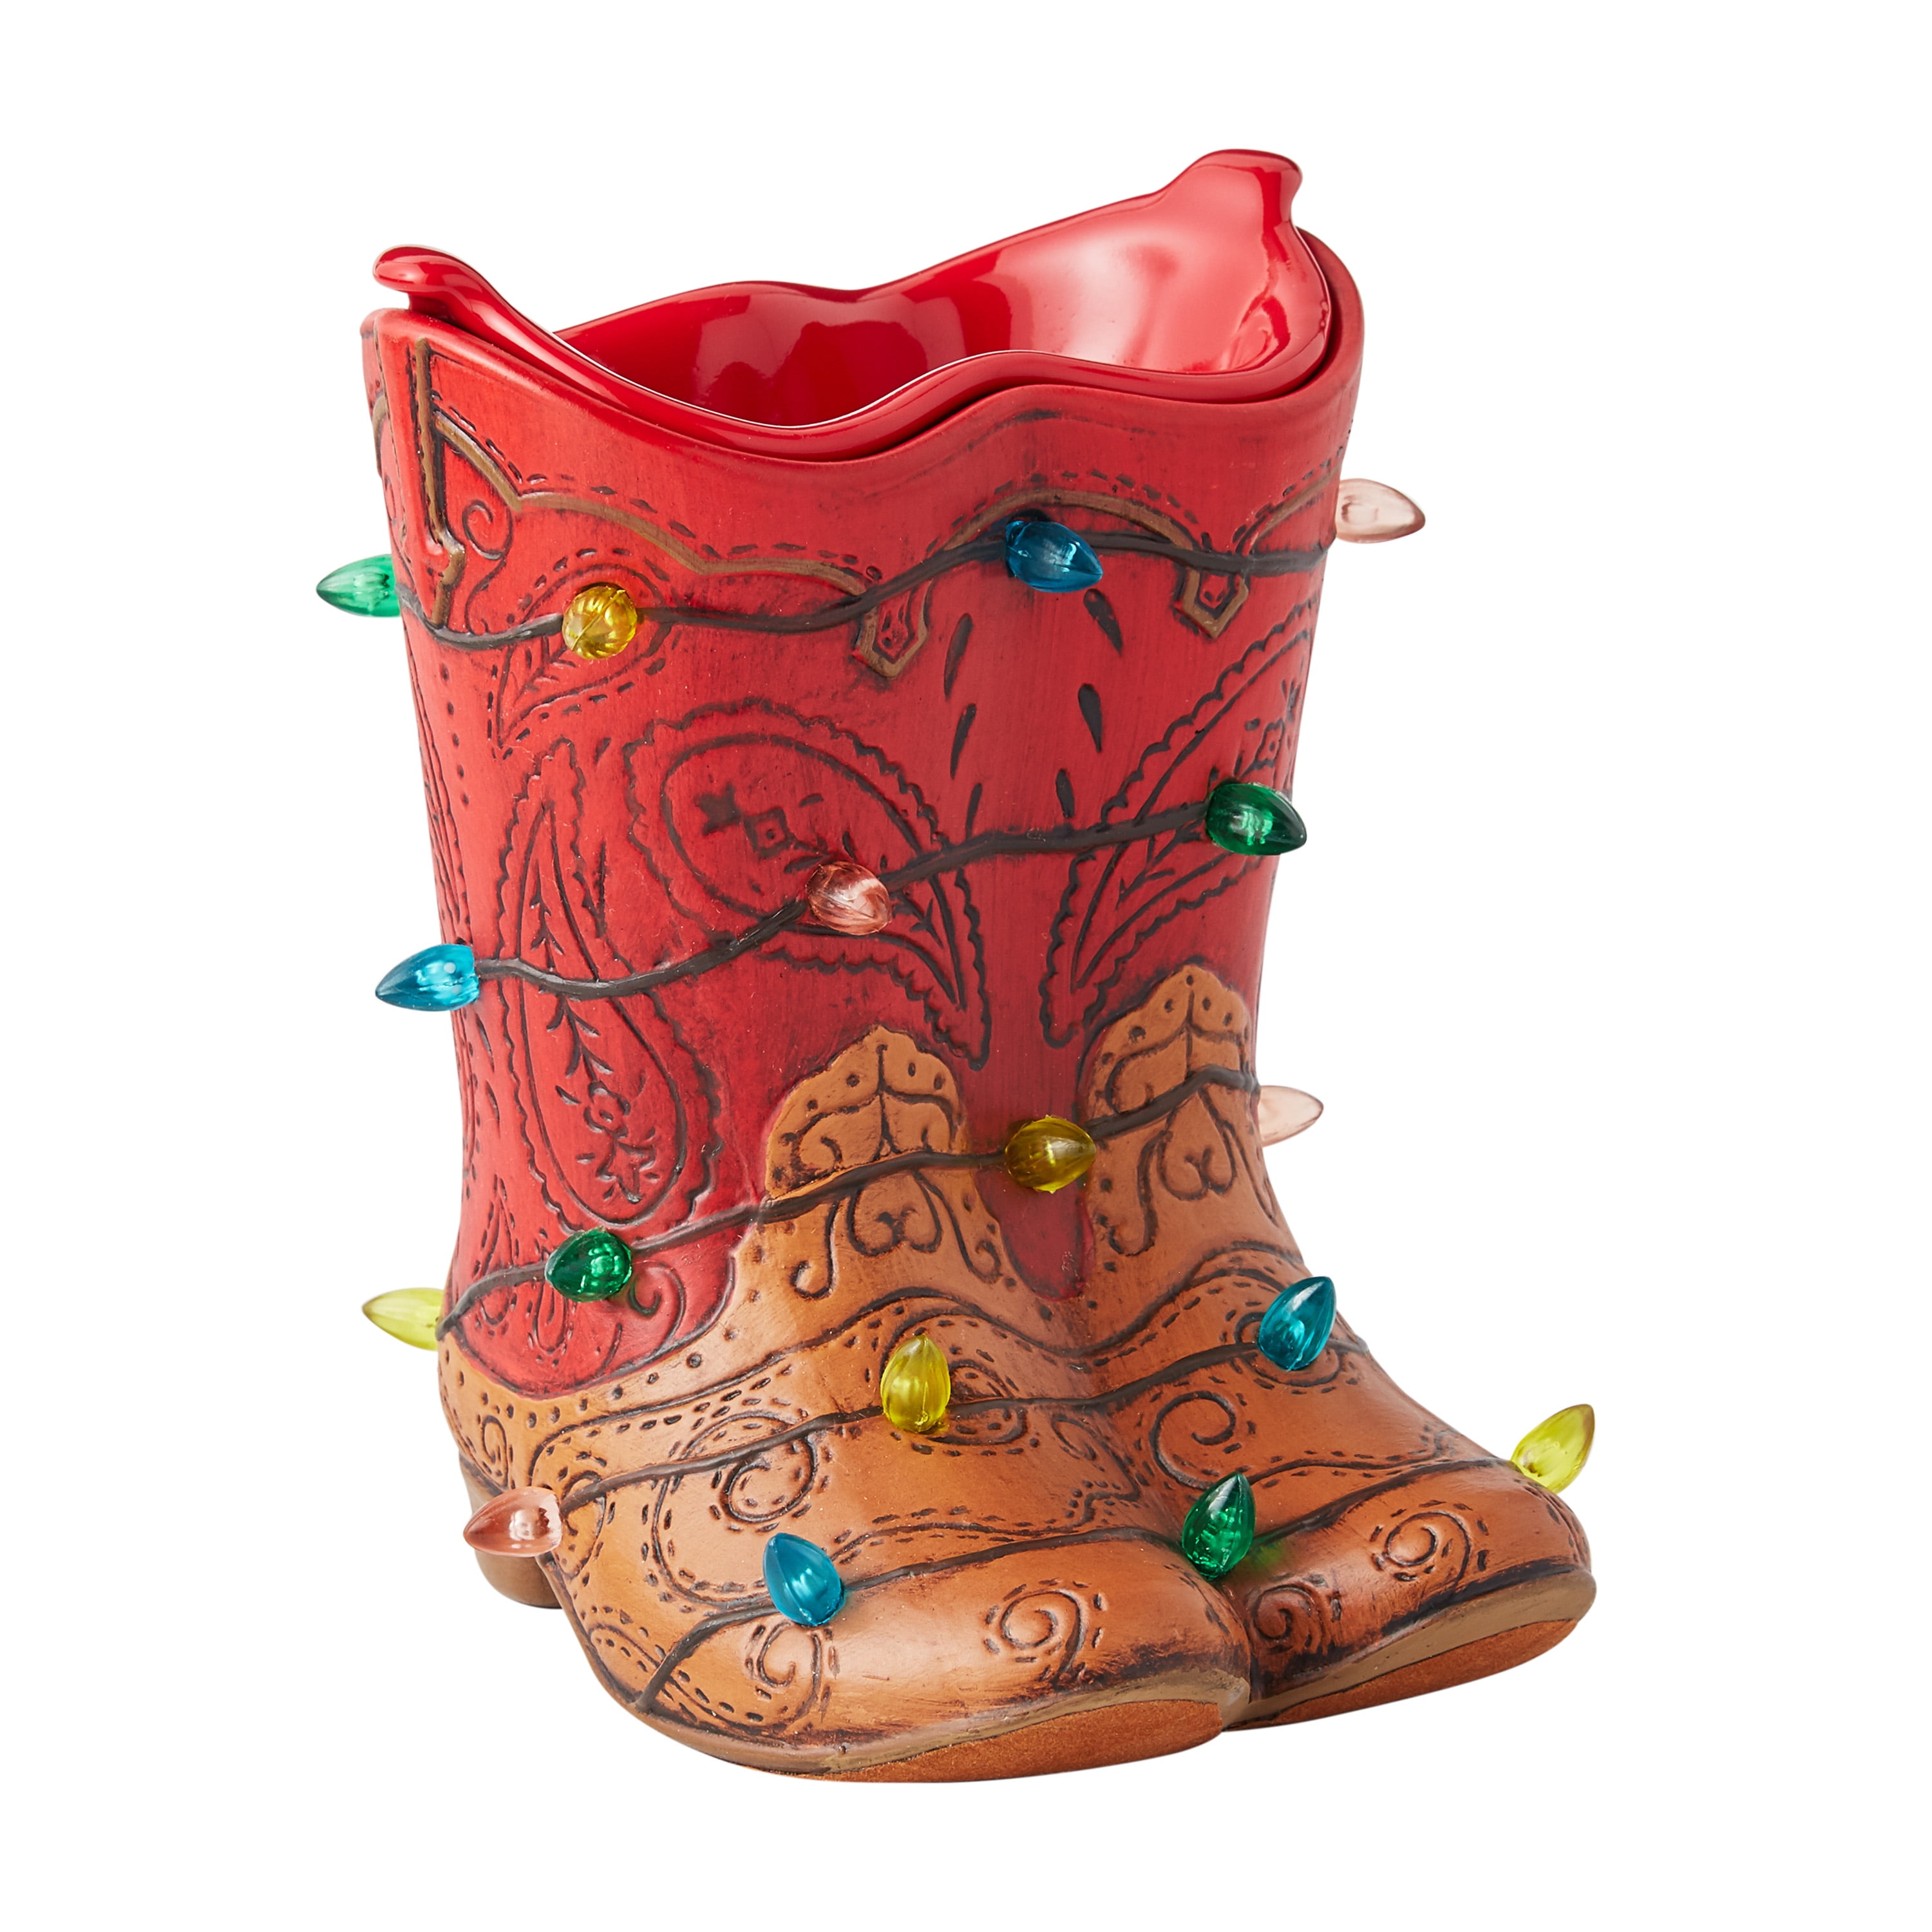 The Pioneer Woman Boots in Lights Full Size Holiday Ceramic Fragrance Warmer